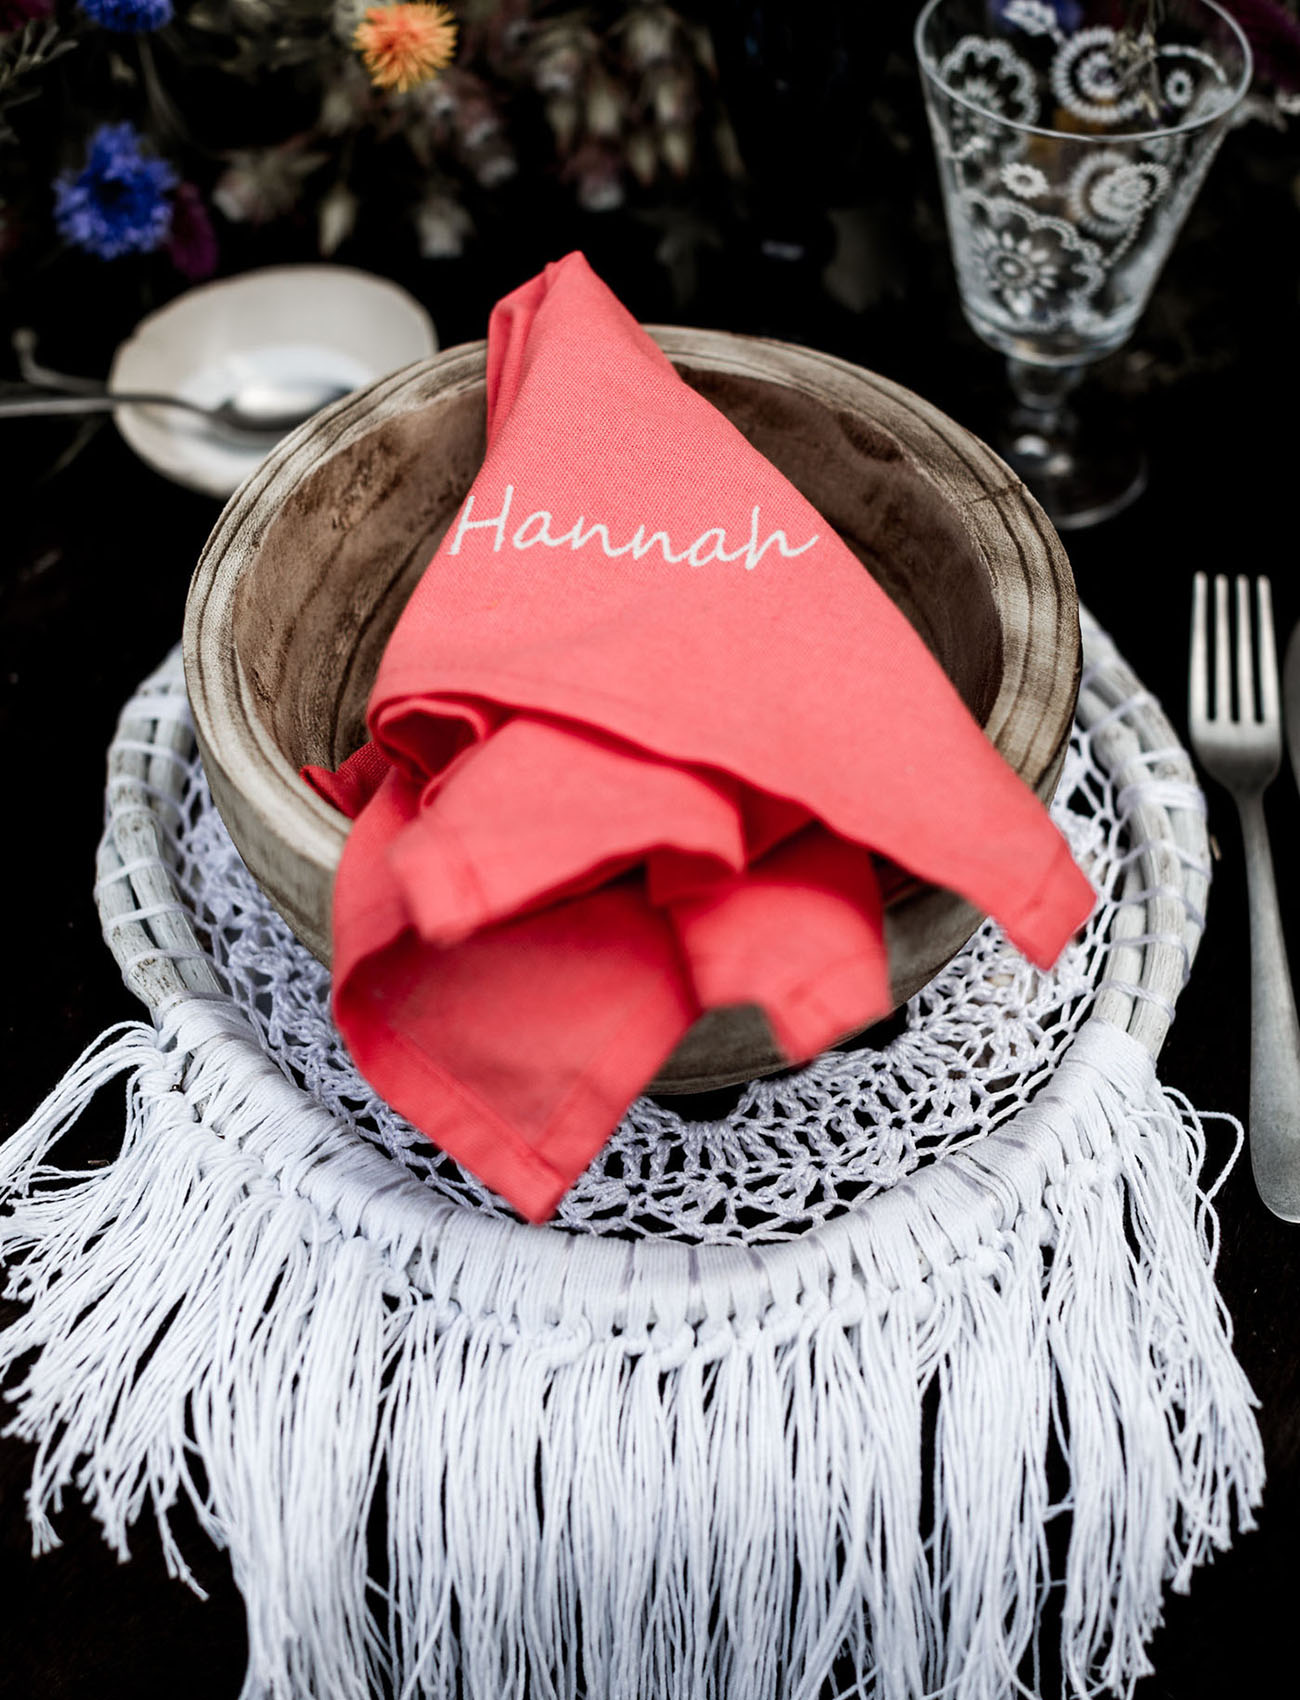 Wooden bowls and coral napkins finished off the tablescape